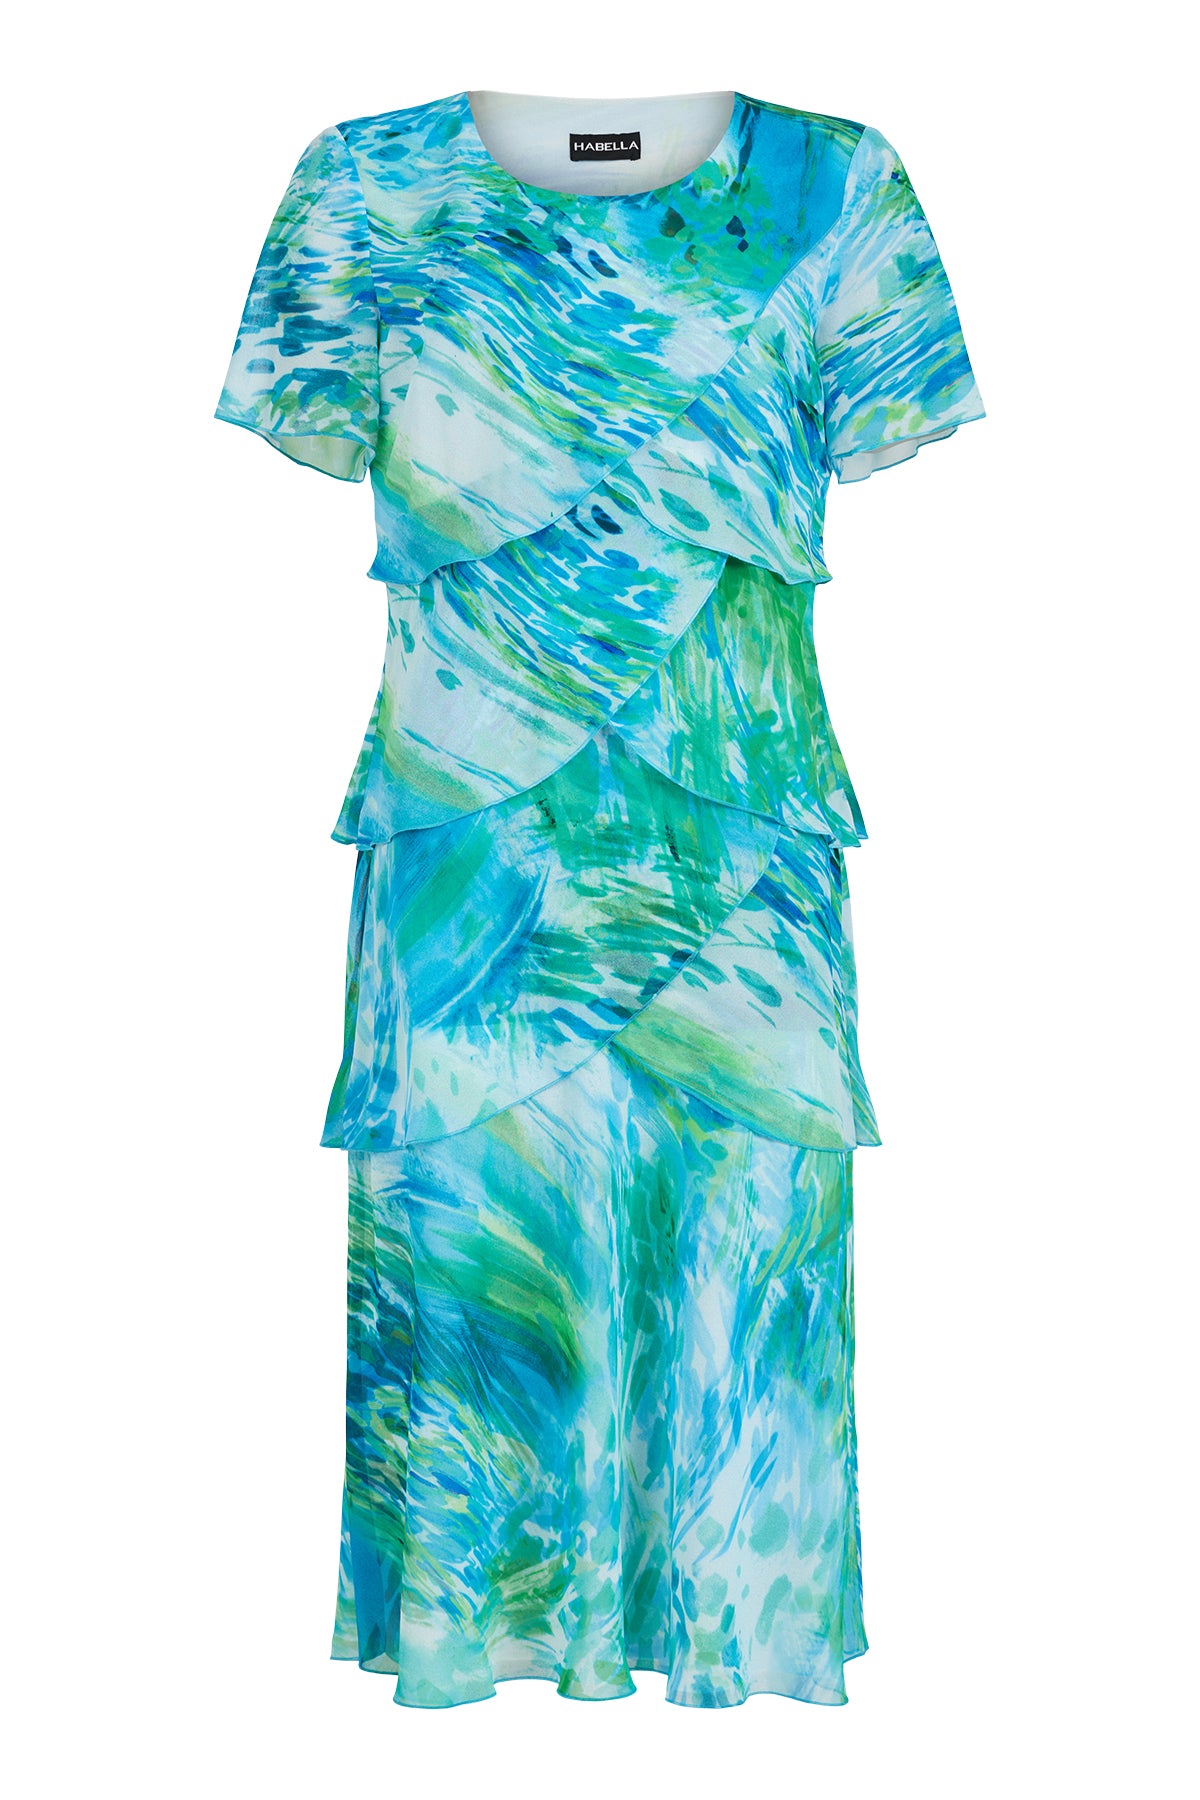 Green/Blue Abstract Print Dress with Layered Effect and Short Sleeves